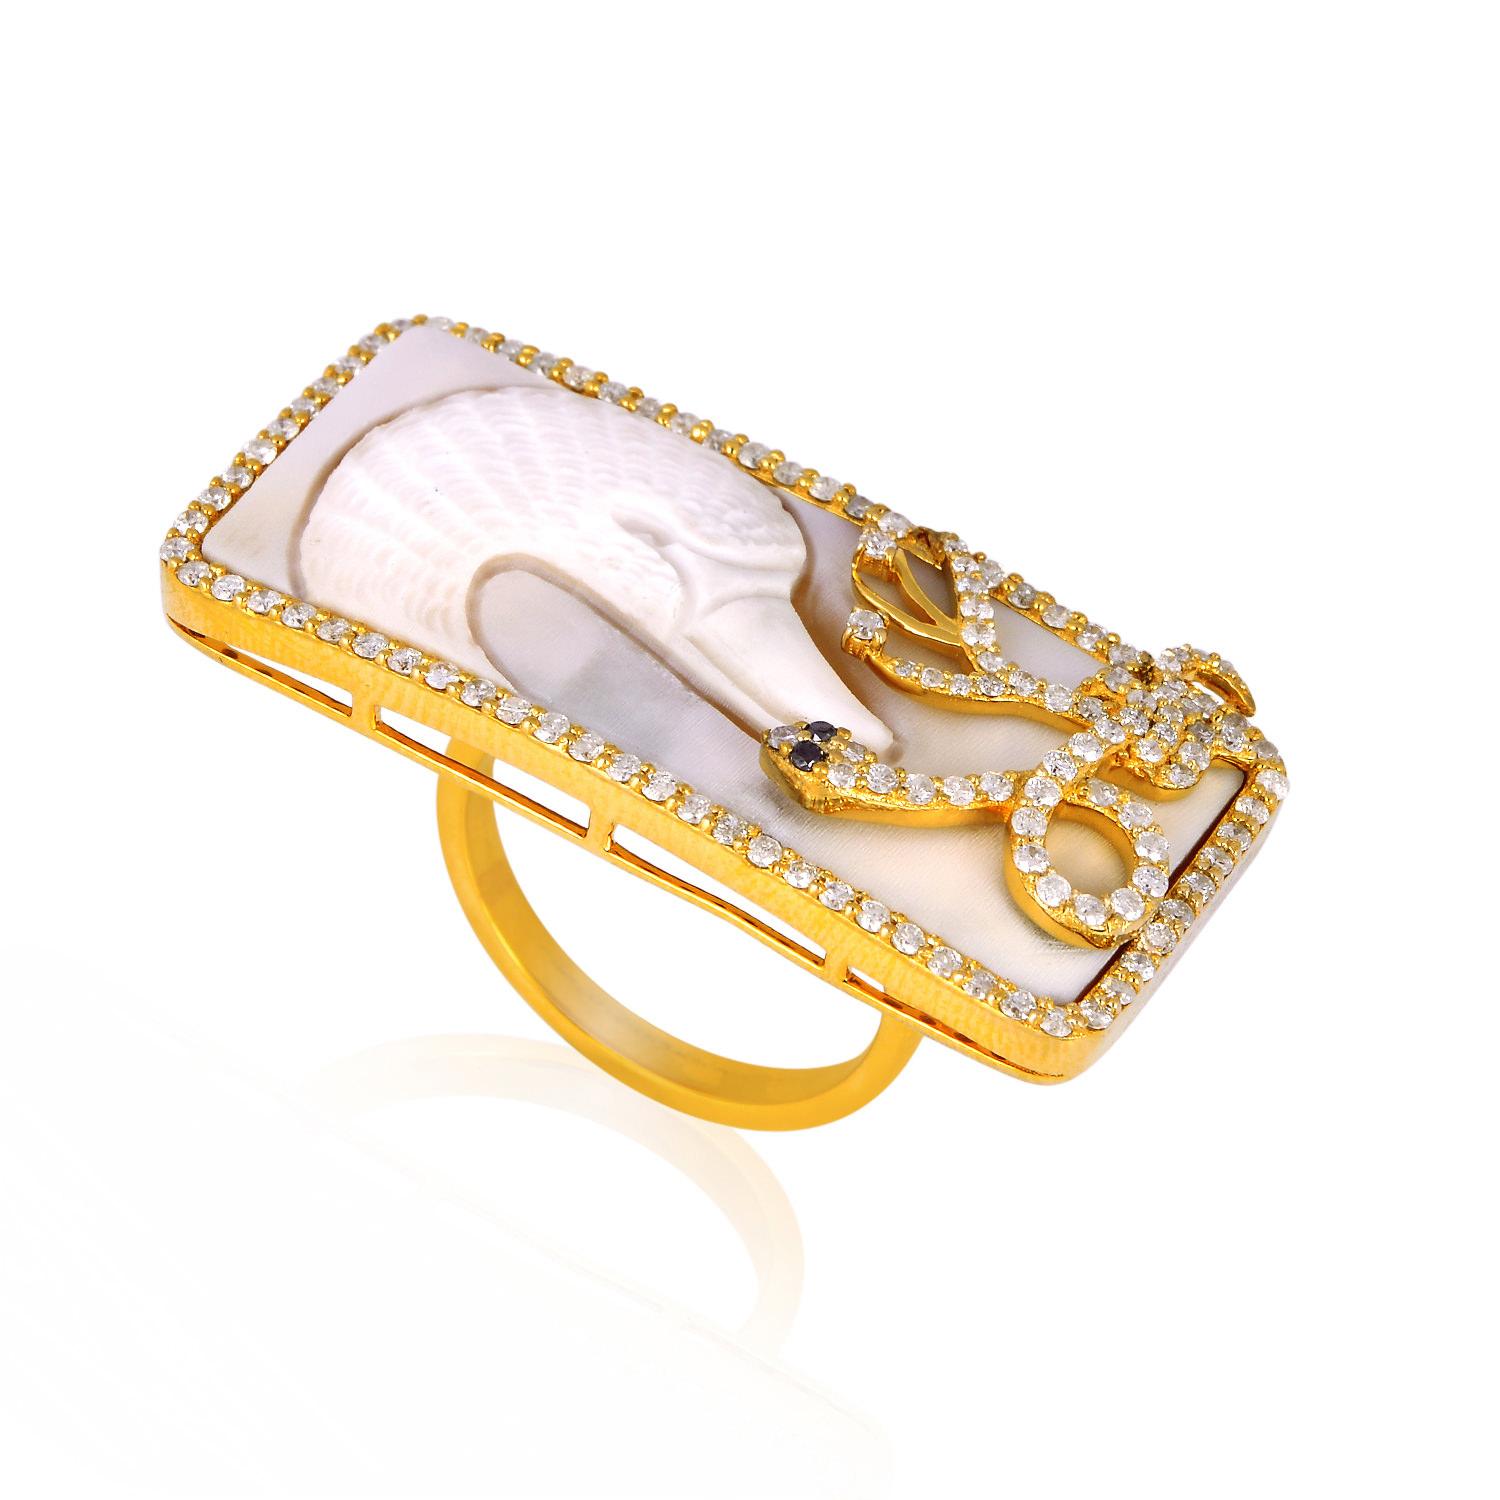 Designer Swan Shell Cameo Ring with Diamonds 18k Gold covering your 2 fingers is one of our favorite pieces. This shell cameo has been hand carved by an Italian artisan.

Ring Size: 7 ( Can be sized )

18Kt Gold: 9.91gms
Diamond: 0.93cts
Shell